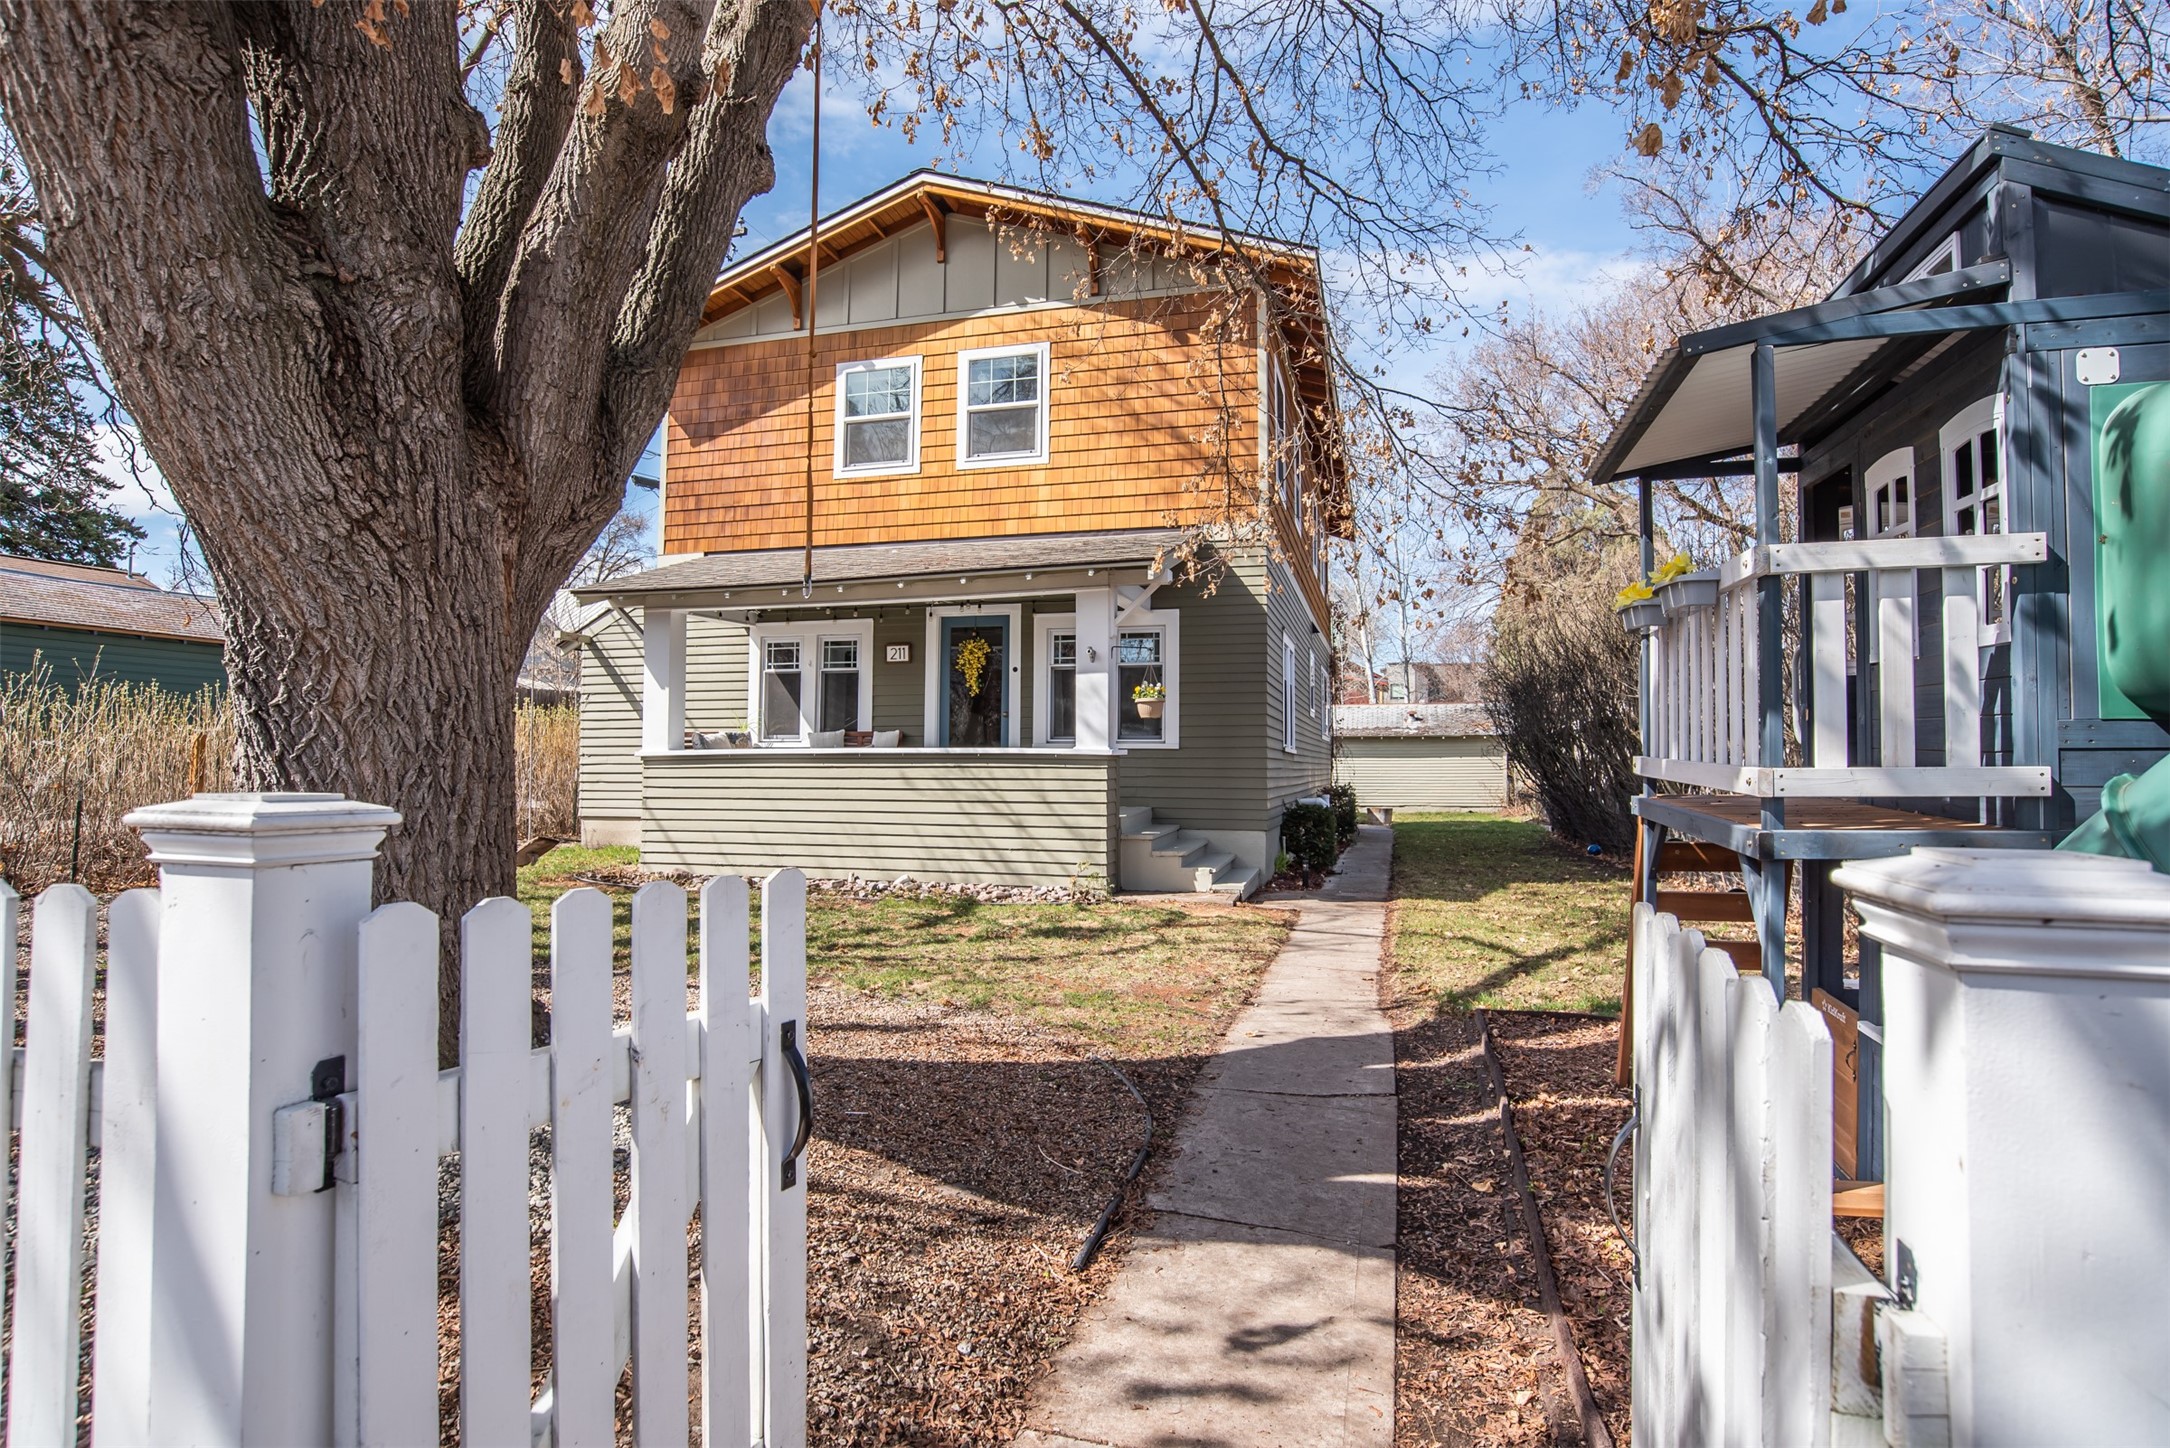 Open House Sunday (4/7) Noon-2PM!  Nestled in a quiet neighborhood with a laid back friendly vibe, this updated home is just off the Clark Fork, steps away from the Milwaukee trail system and bike path, farmers markets, parks, restaurants and all that downtown has to offer.  Walk to a Griz game, or hike up the M trail all right from your front door.  Located in the highly desirable Paxson Elementary and Washington Middle school district, this home has everything buyers are looking for.  The main floor features a home office or fourth bedroom, a laundry room / pantry off the updated kitchen featuring brand new Electrolux washer and dryer.  Updated kitchen with ample storage and a cedar lined coat and gear closet.  Upstairs you’ll find a large balcony located off the primary suite, with a beautiful mountain view.  It's perfect for enjoying your morning coffee or unwinding with a glass of wine in the evening. 
Two other second story bedrooms with built in desks, and a full bath with double vanity and a large soaking tub.  Semi finished basement with ample storage space, a second fridge, and bonus room.  The white picket fenced in yard boasts in ground sprinkler system, mature chestnut and maple trees, lilacs, a big front porch, and a back patio. The oversized single detached garage (accessible via the alley) has room for a workspace for hobbies and projects.